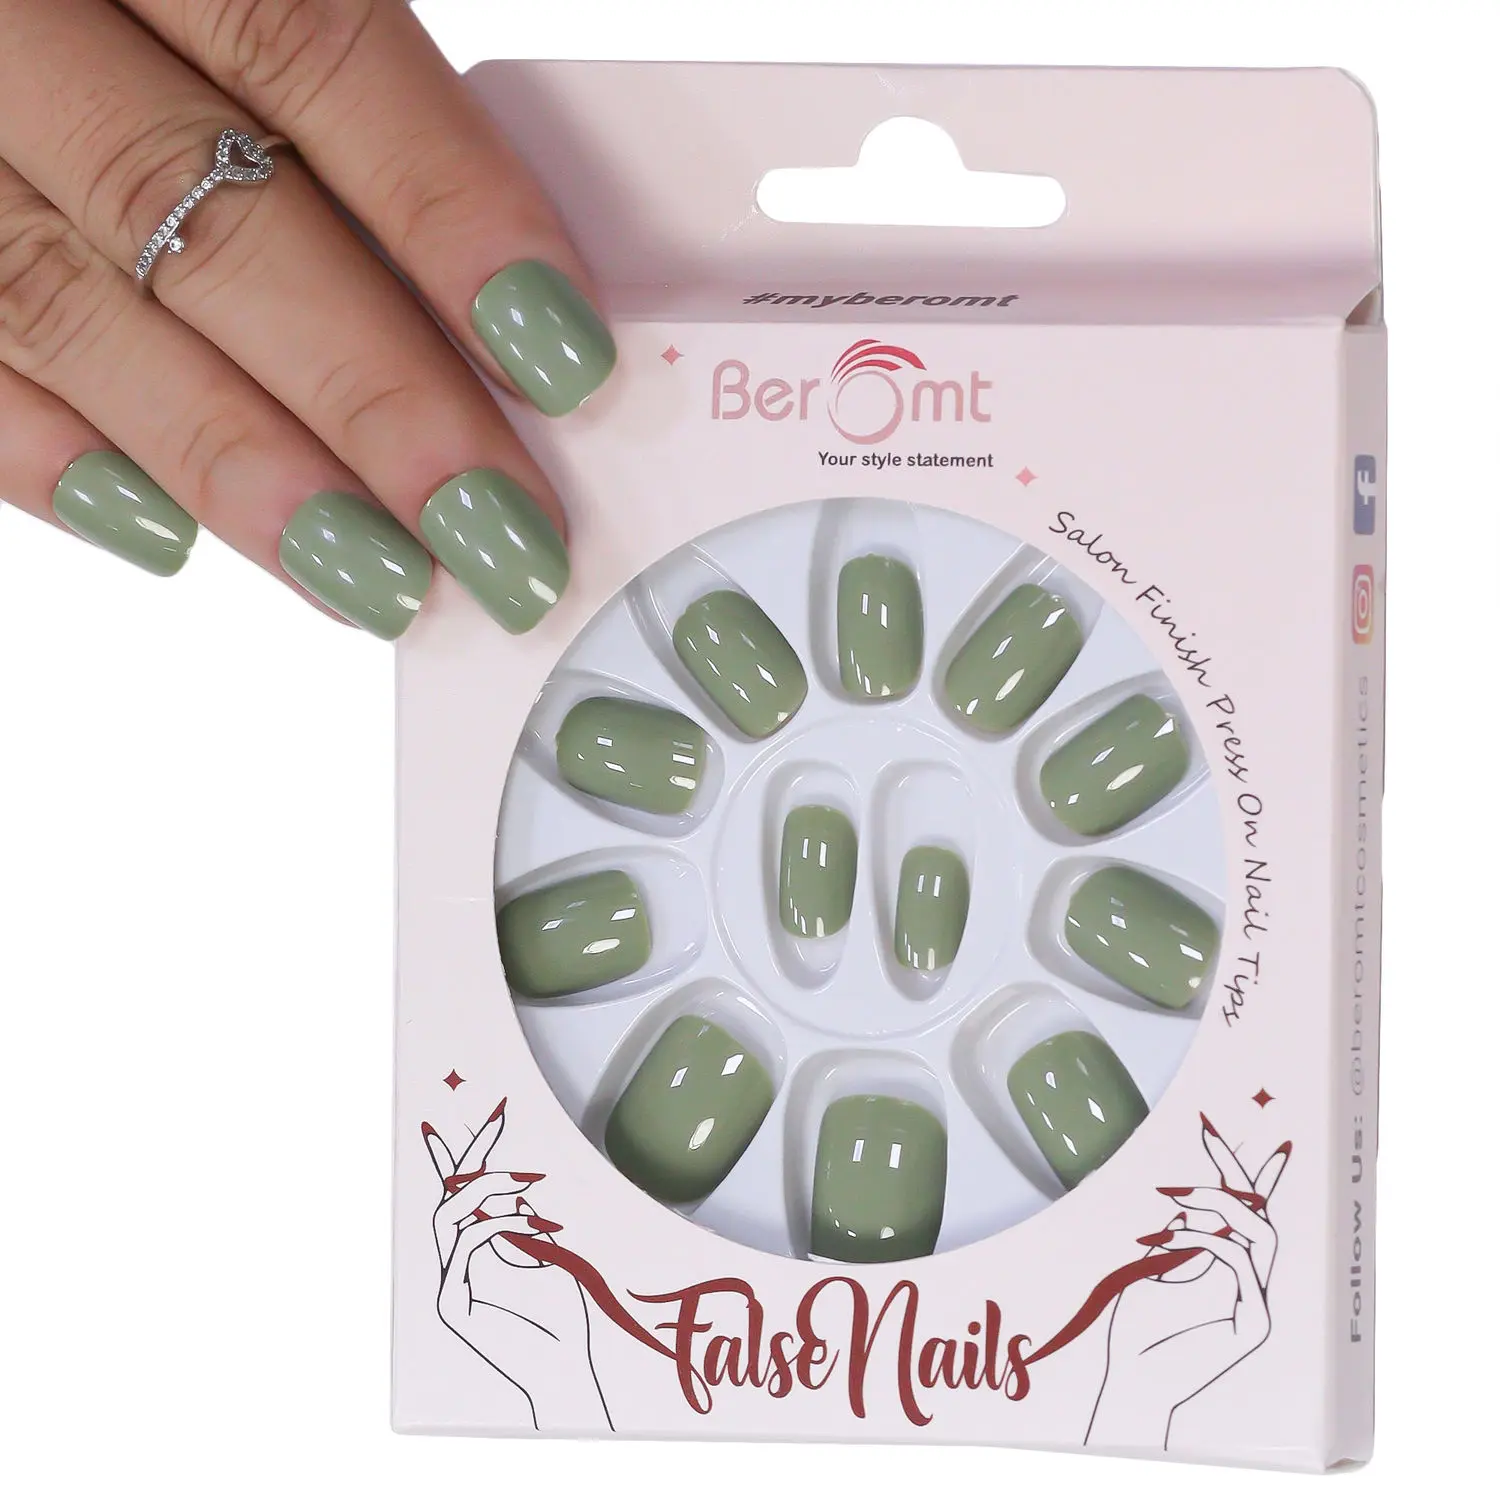 BEROMT PREMIUM GLOSSY NAILS- 318 (NAIL KIT INCLUDED)